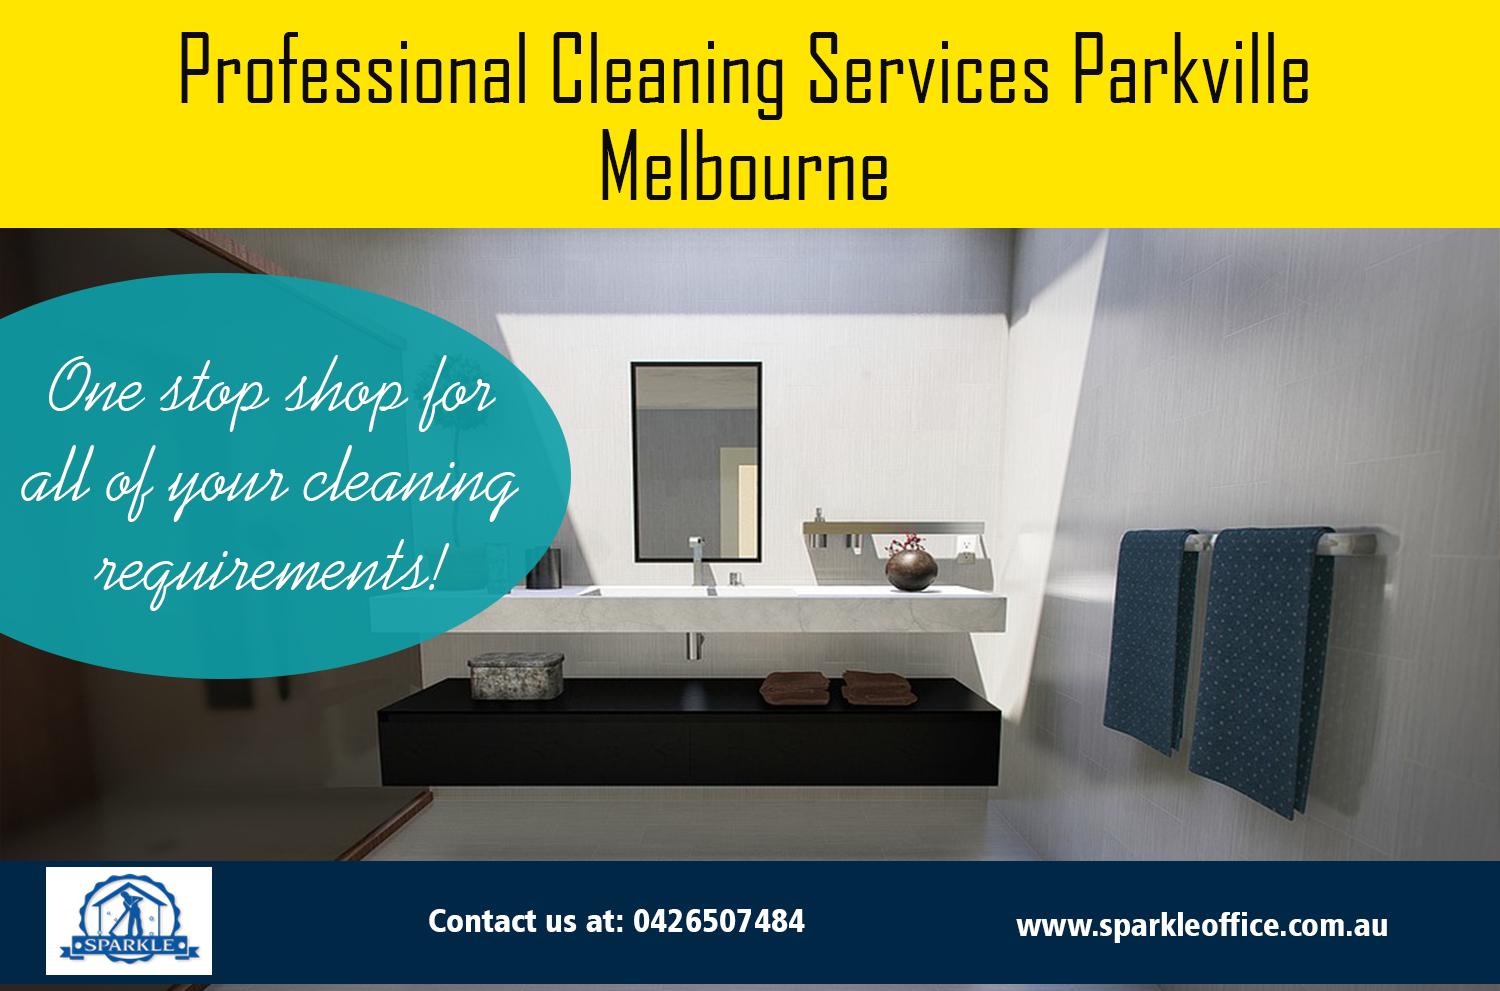 Professional Cleaning Services Parkville Melbourne